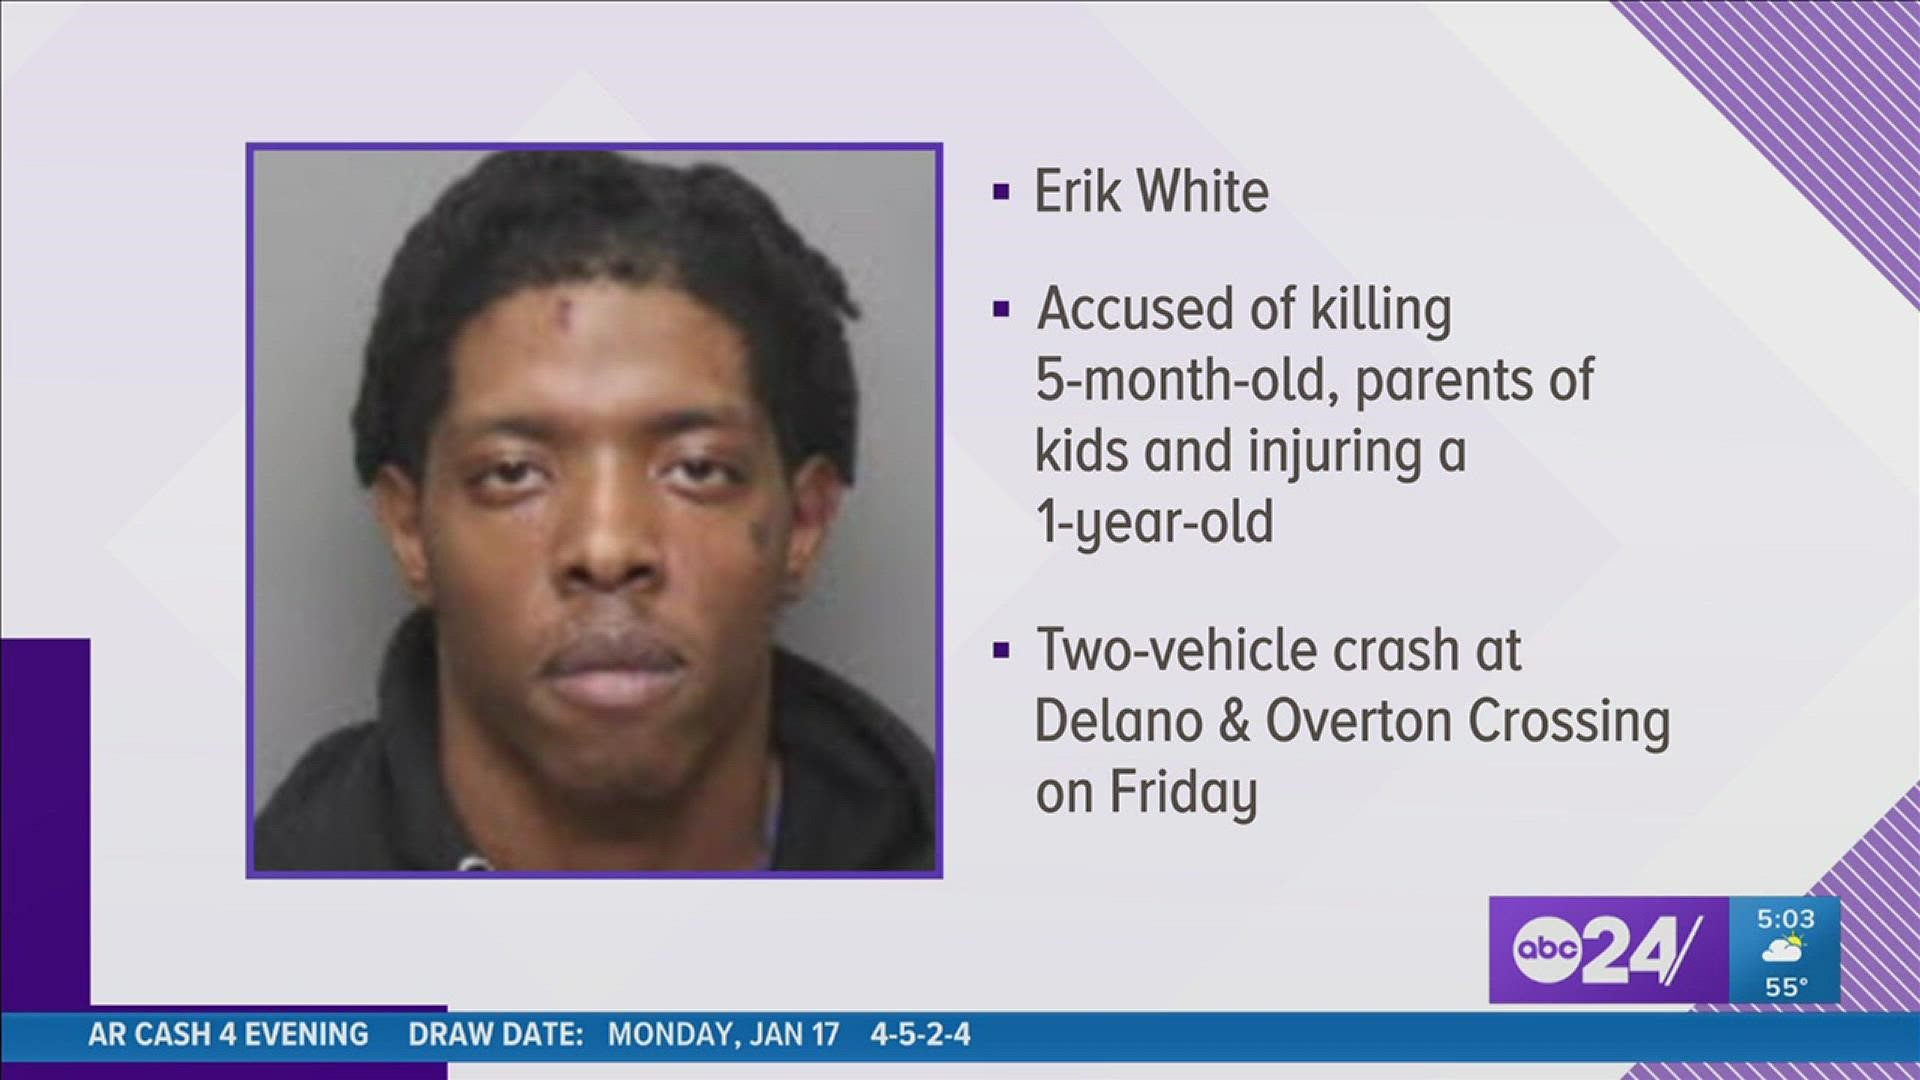 Erik White is wanted in the crash late Friday night at the intersection of Overton Crossing Street and Delano Avenue that killed 3, including a 5-month-old.